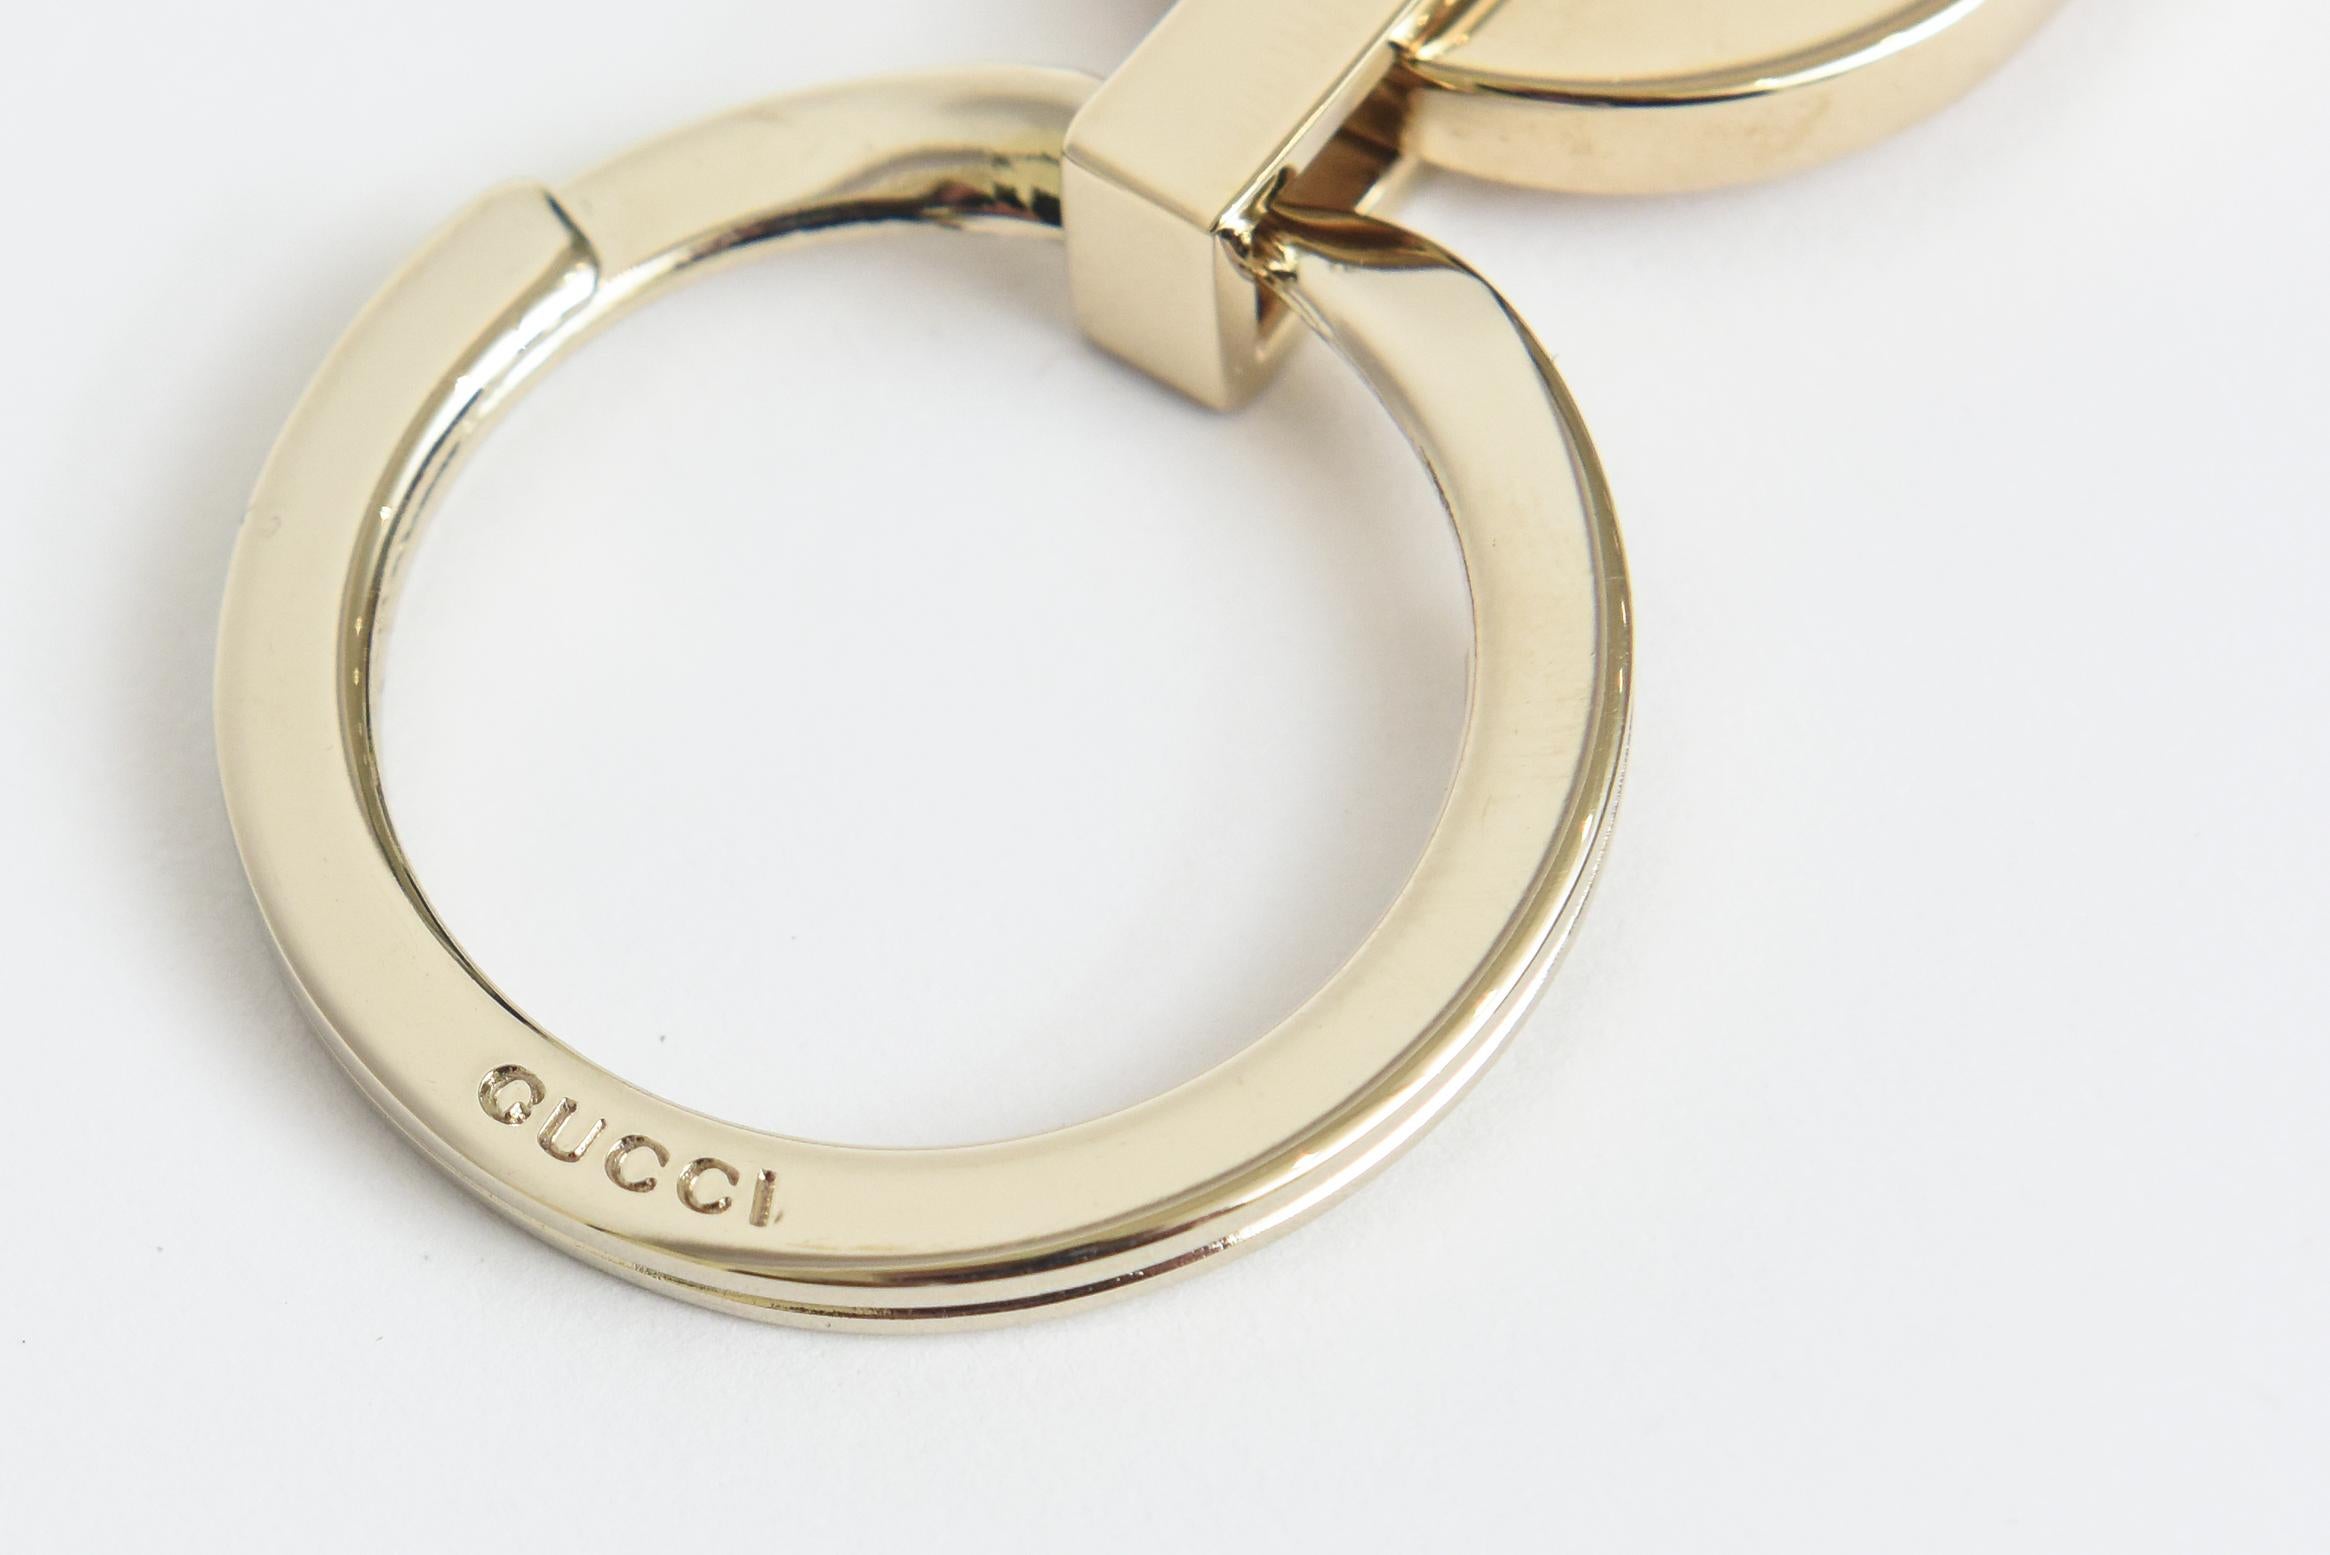 Gucci Vintage Gold Plated Unisex Keychain In Good Condition For Sale In North Miami, FL